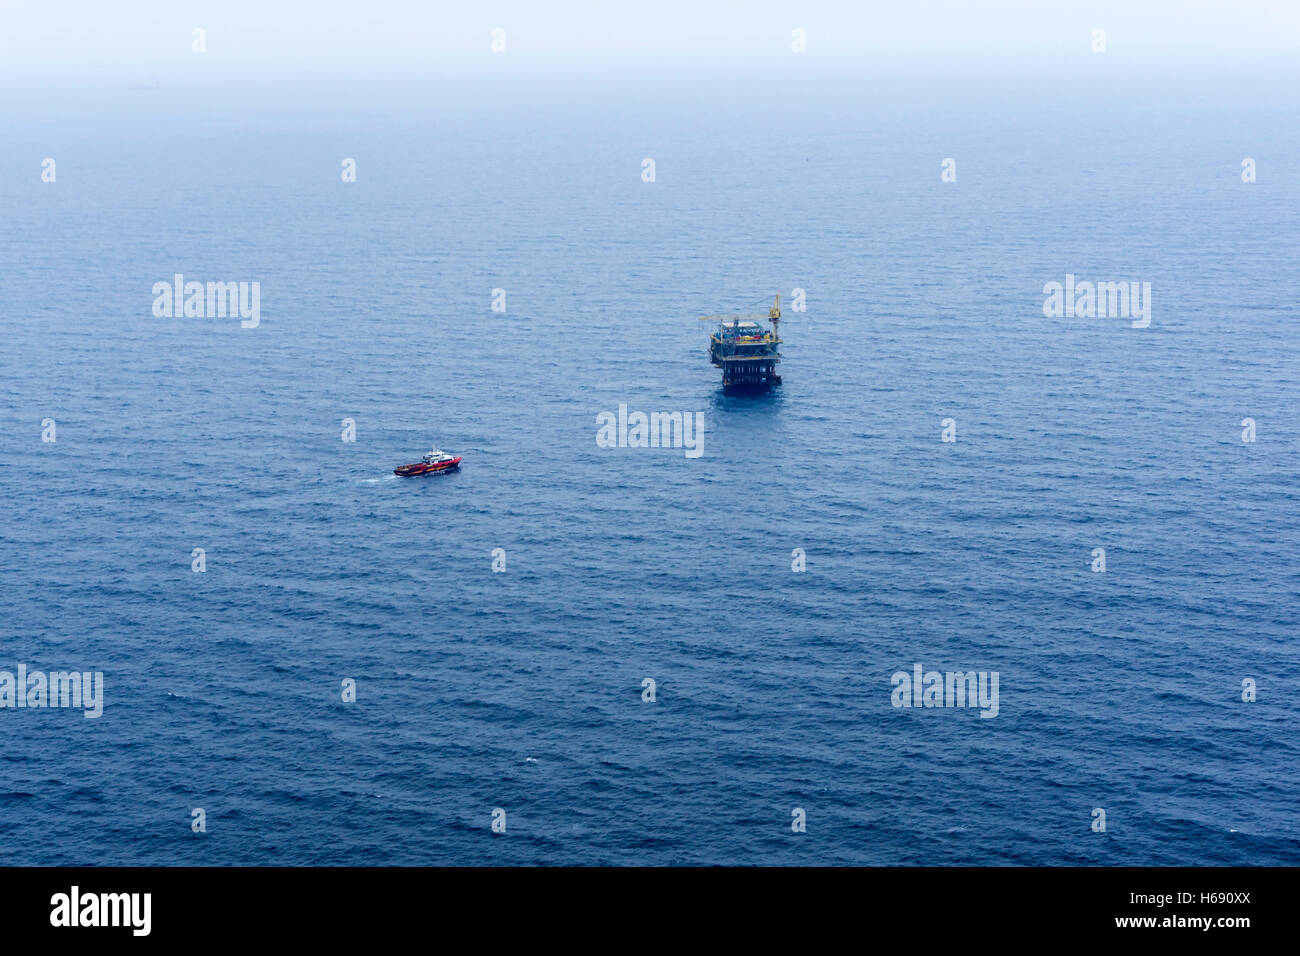 Anchor handling tug approaching oil rig or platform during anchor handling operations Stock Photo